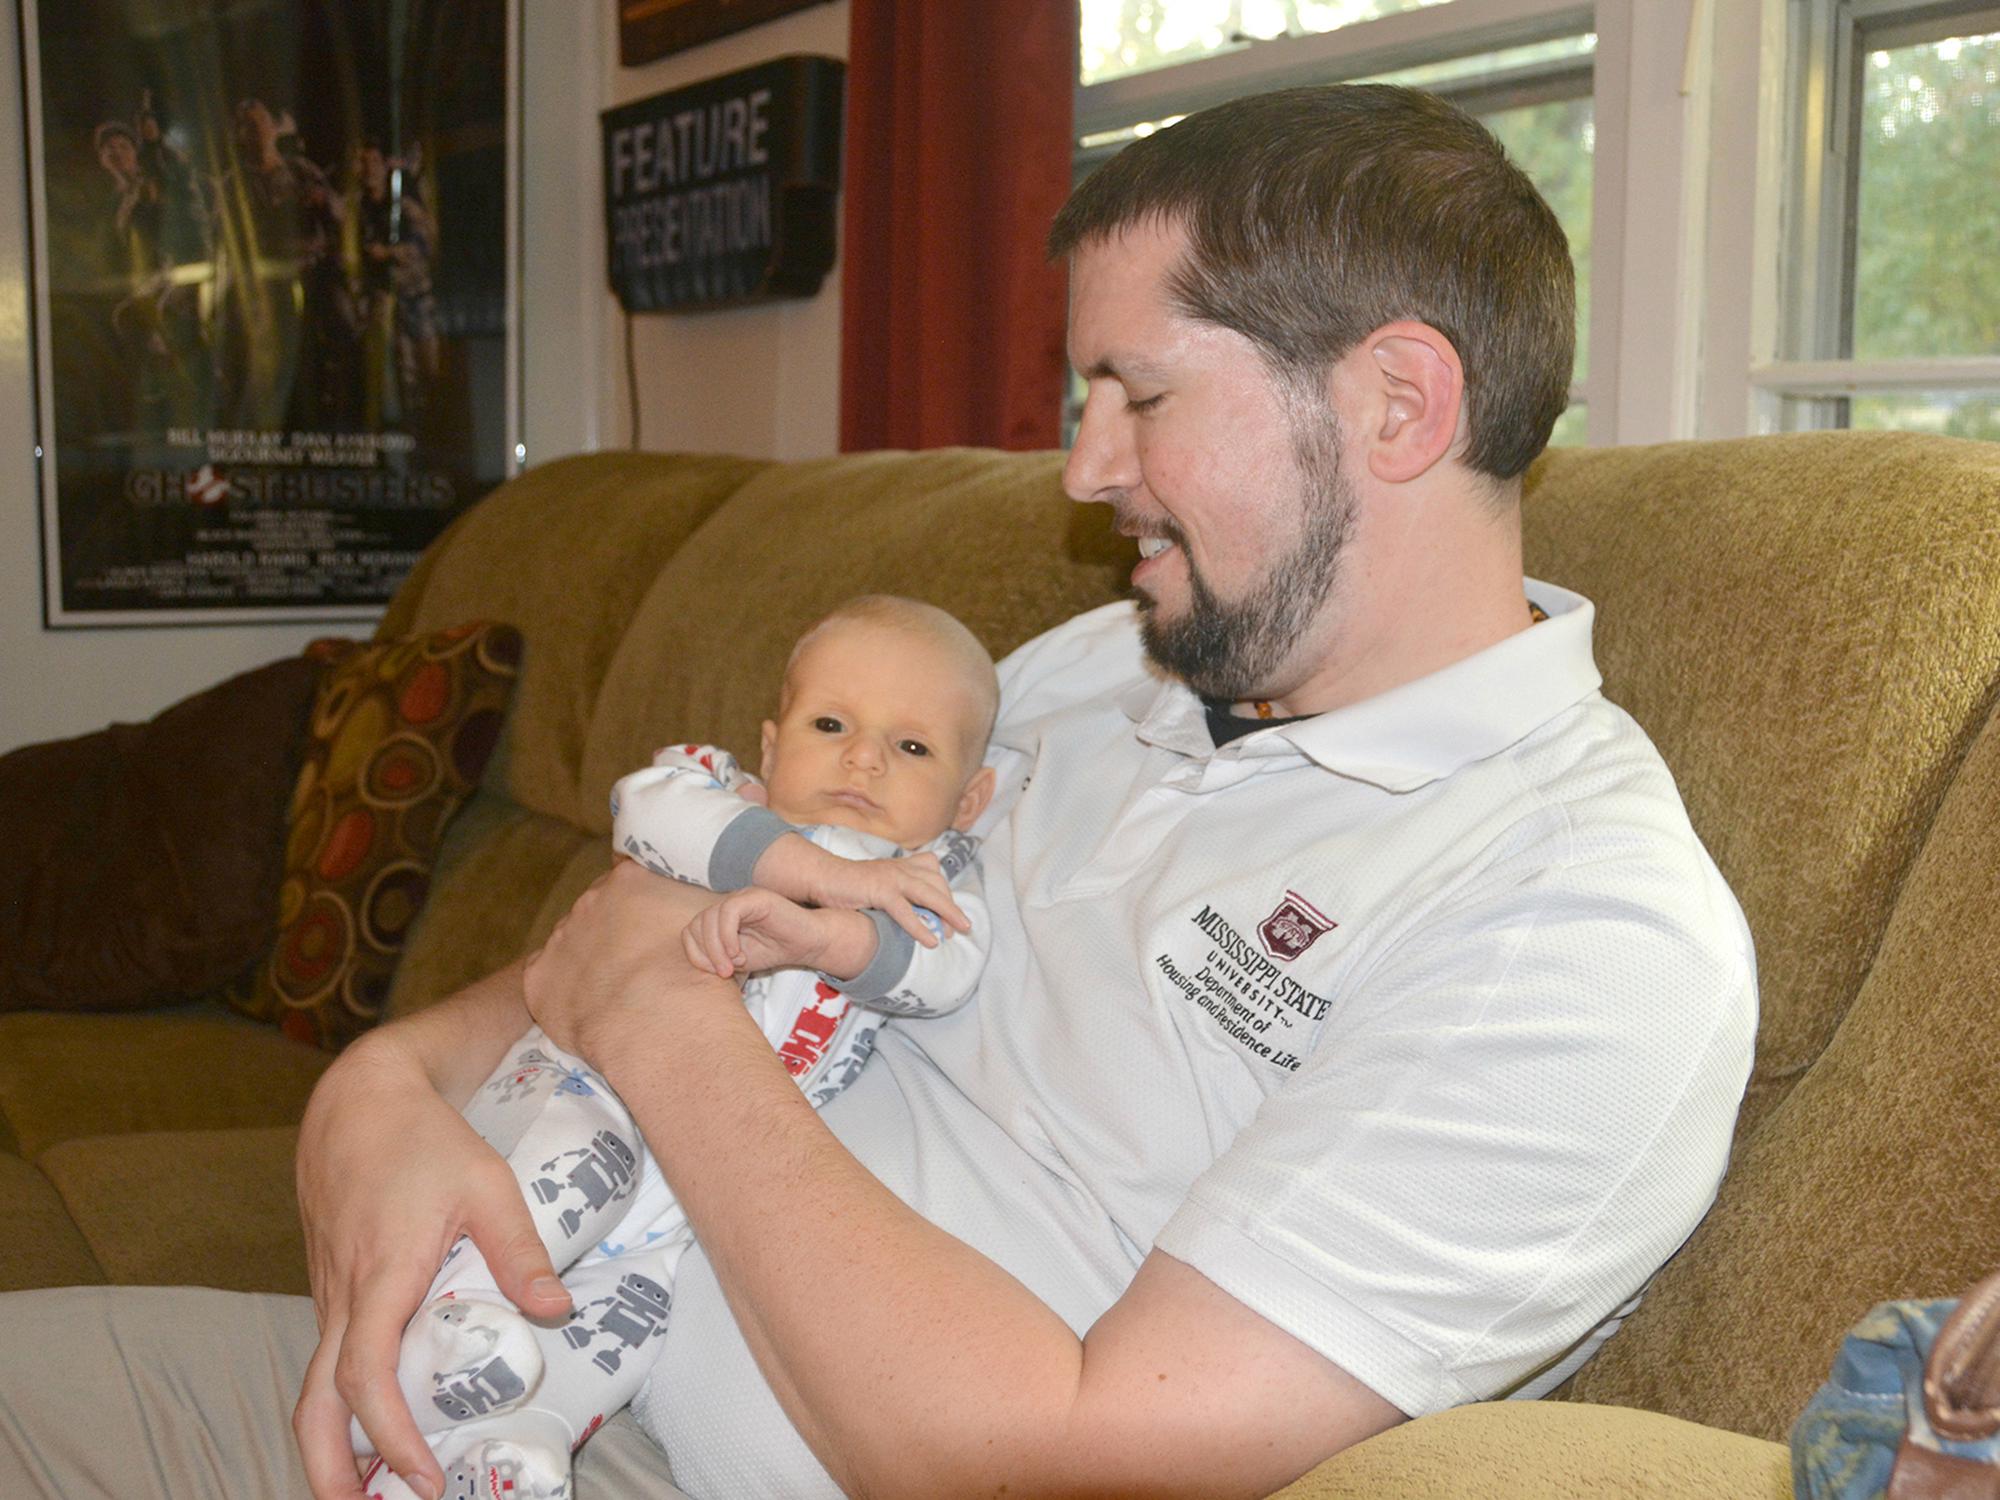 Boone Purser enjoys afternoon cuddles with his son, Benji, on Oct. 31, 2016. Benji is a breastfed baby who thrives on attention from both his parents at his home in Starkville, Mississippi. (Photo by MSU Extension Service/Linda Breazeale)